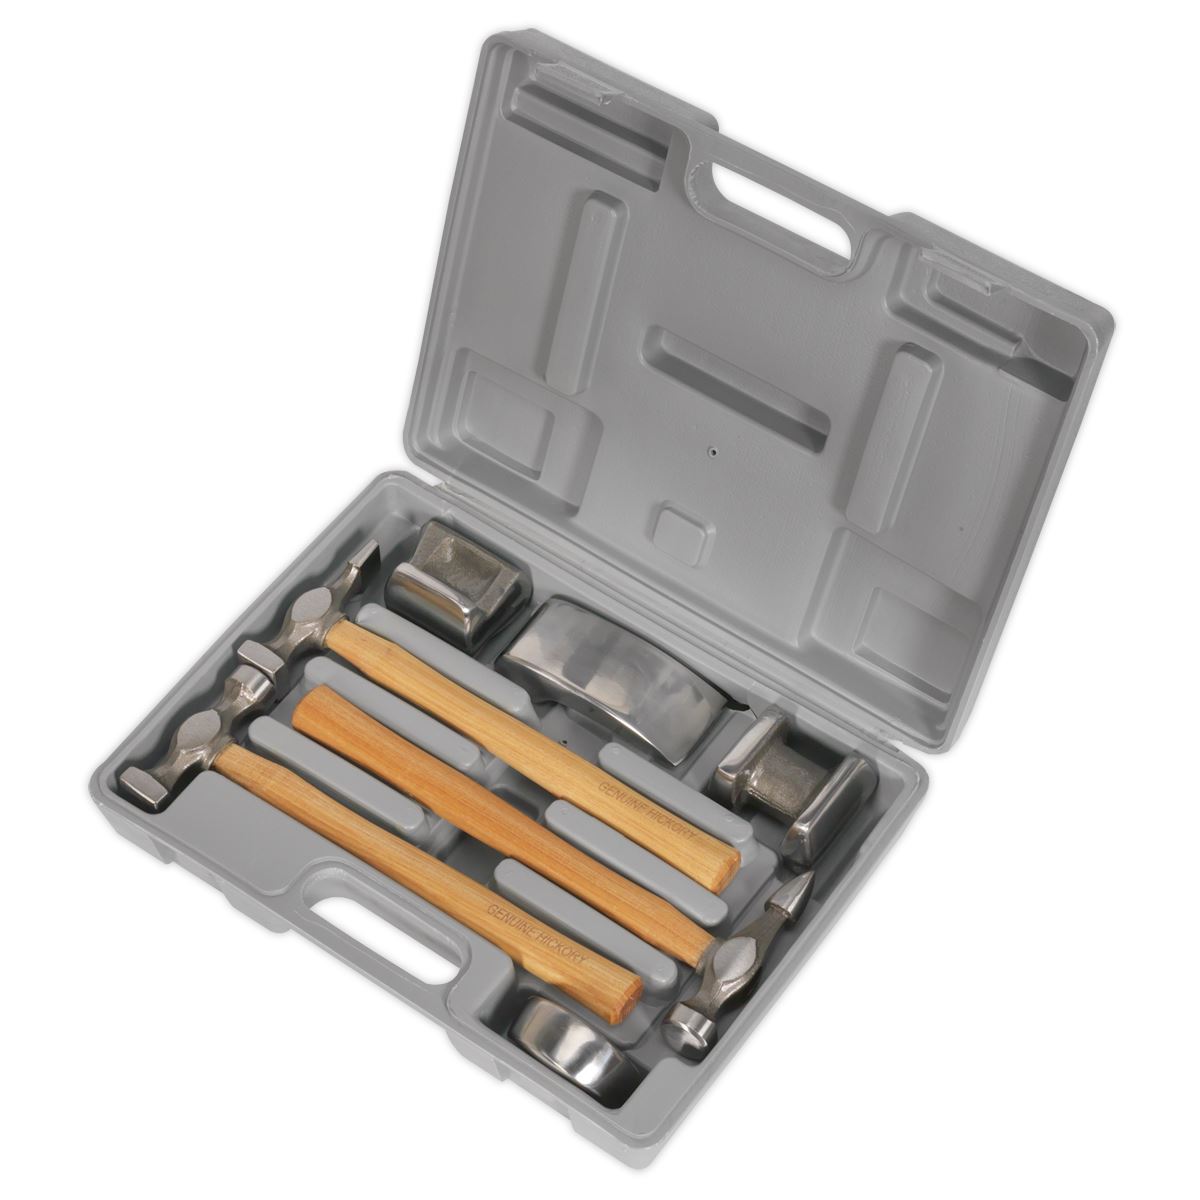 Sealey Panel Beating Set 7pc Drop-Forged Hickory Shafts